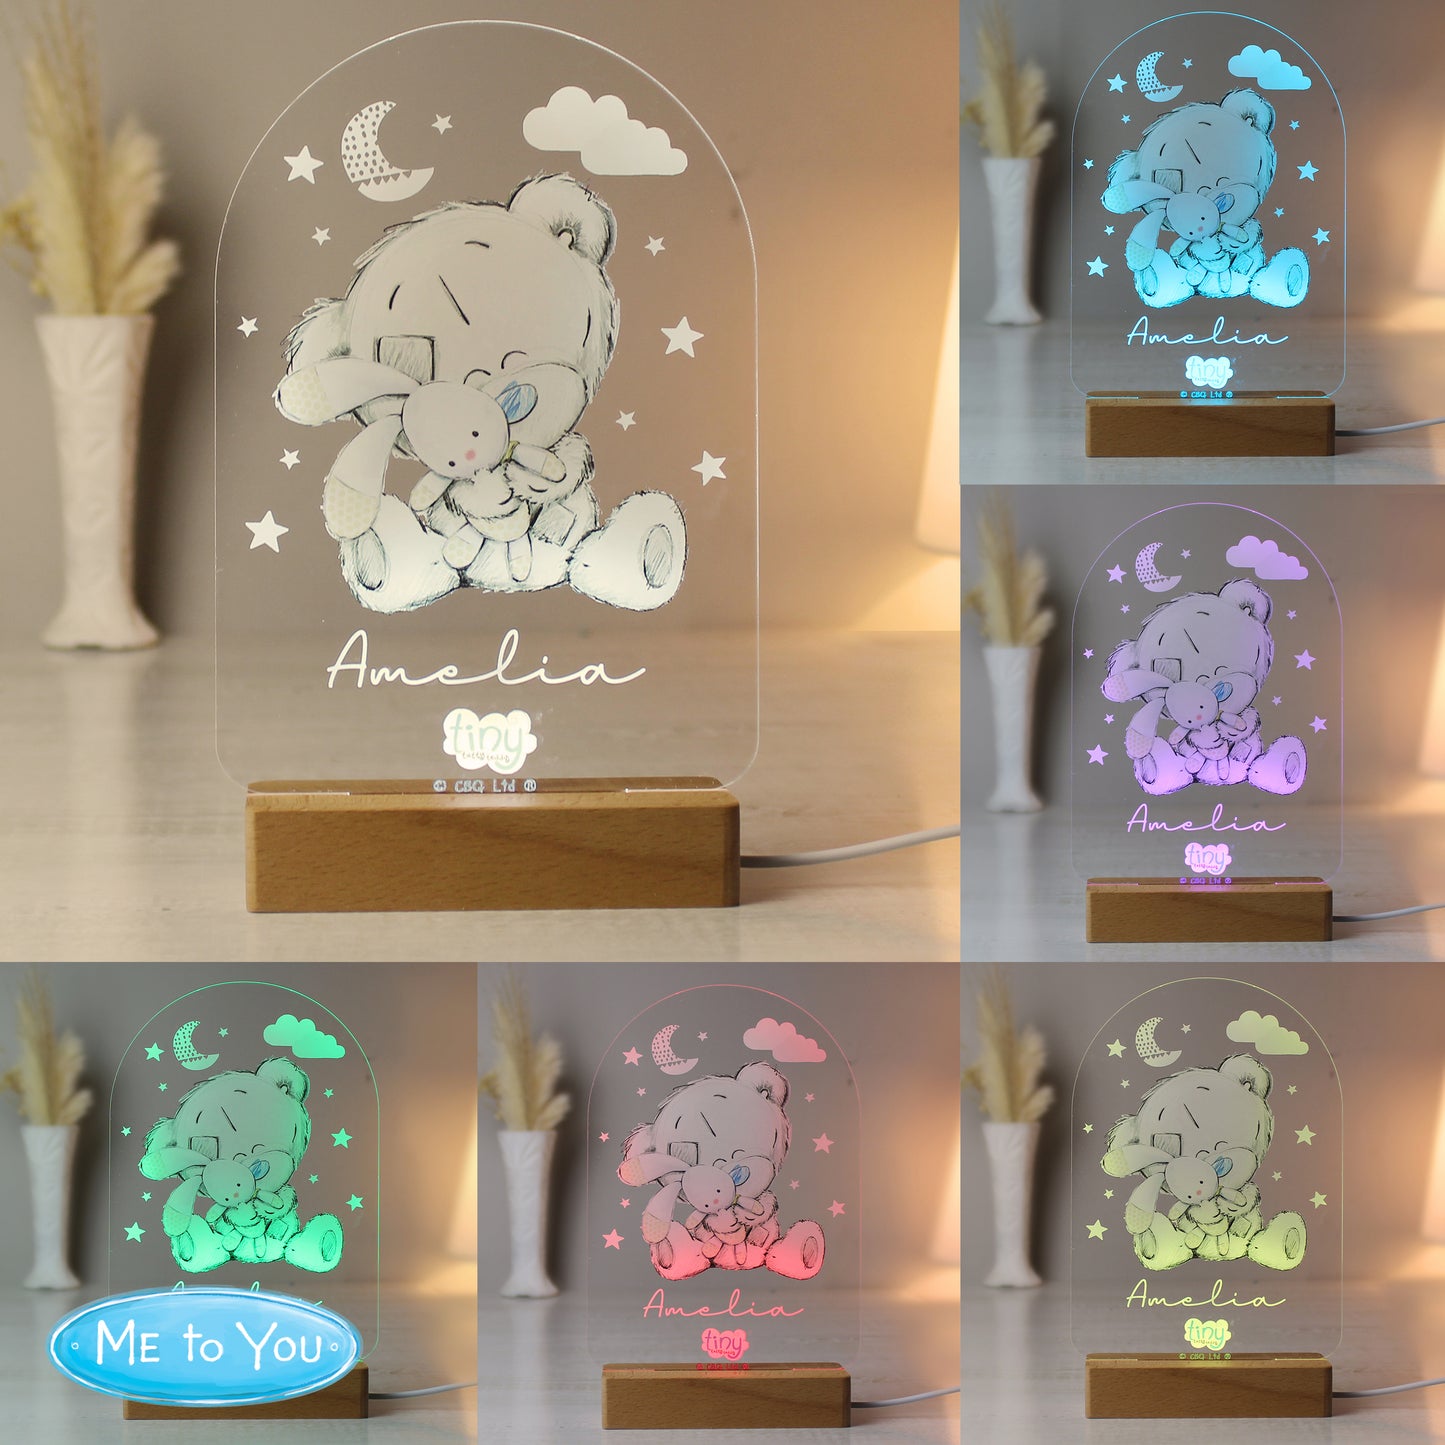 Personalised Tiny Tatty Teddy (Me to You) Wooden Based LED Light